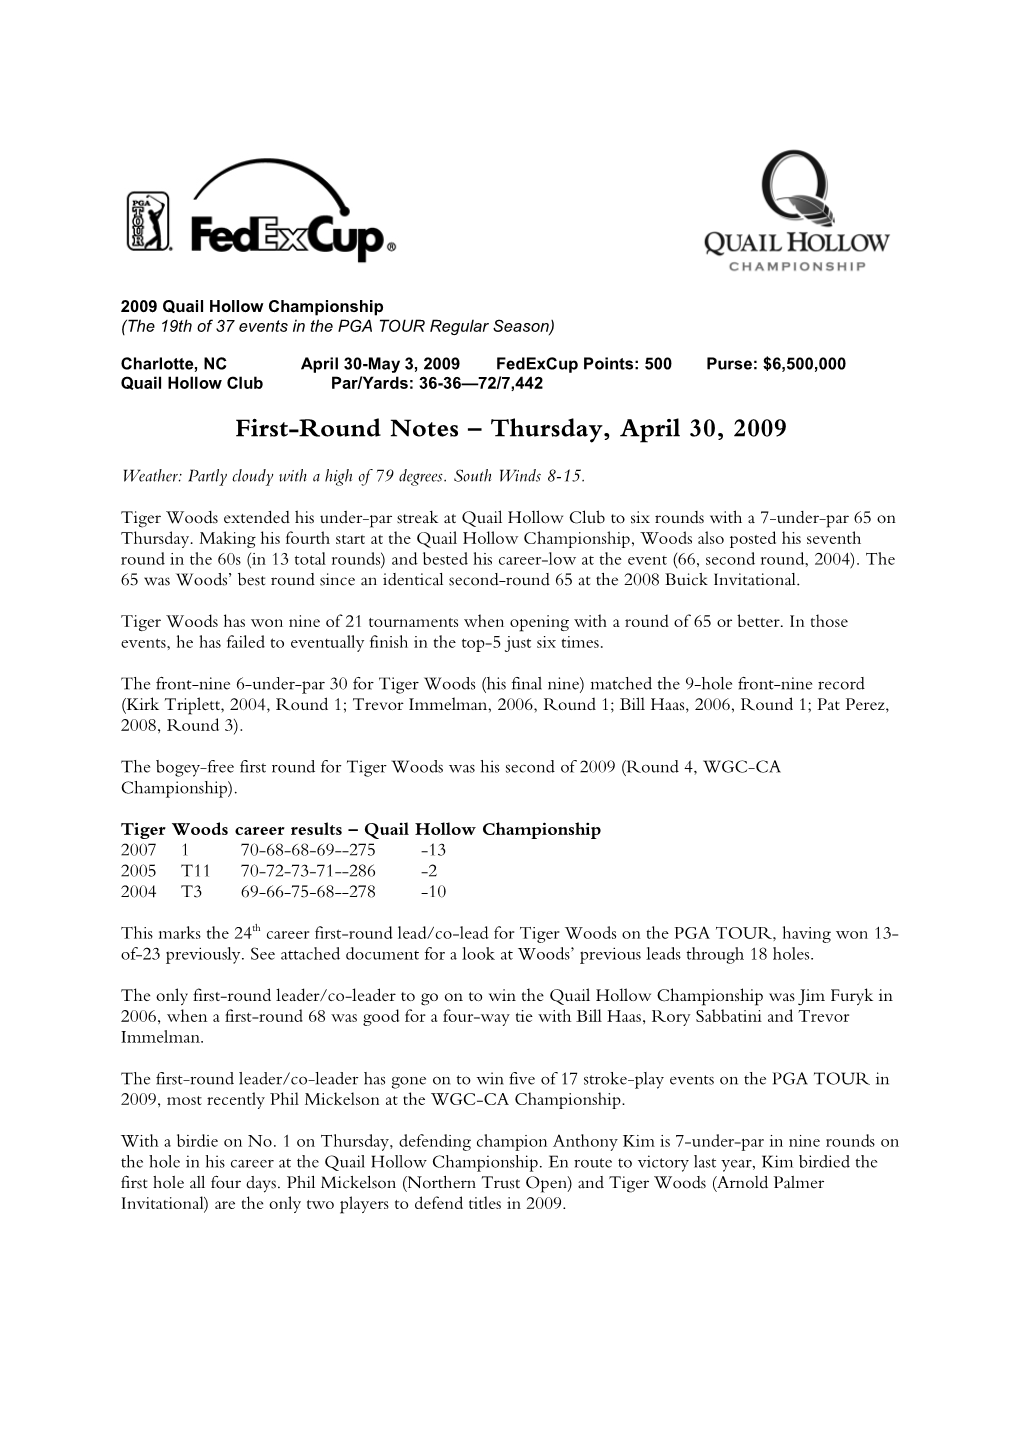 First-Round Notes – Thursday, April 30, 2009